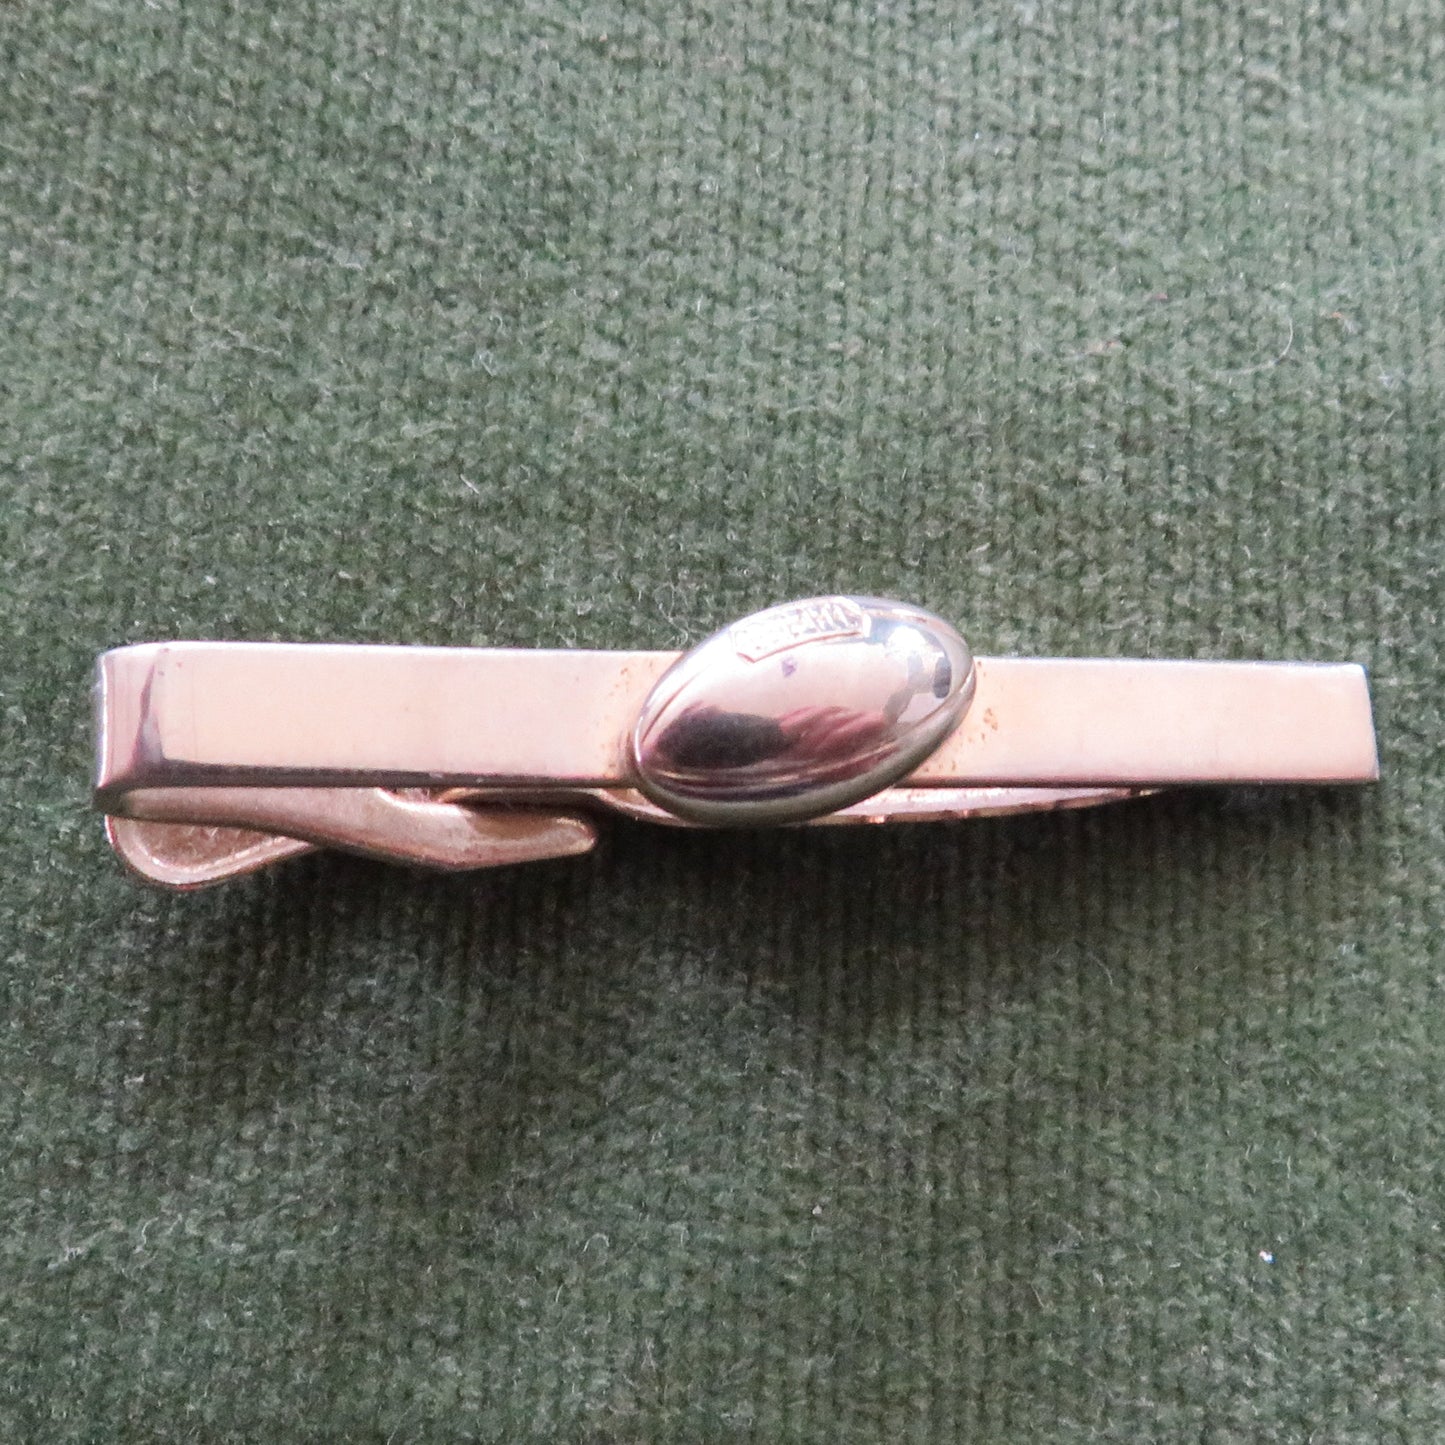 Tie Clasp White Metal With A League Football Adornment